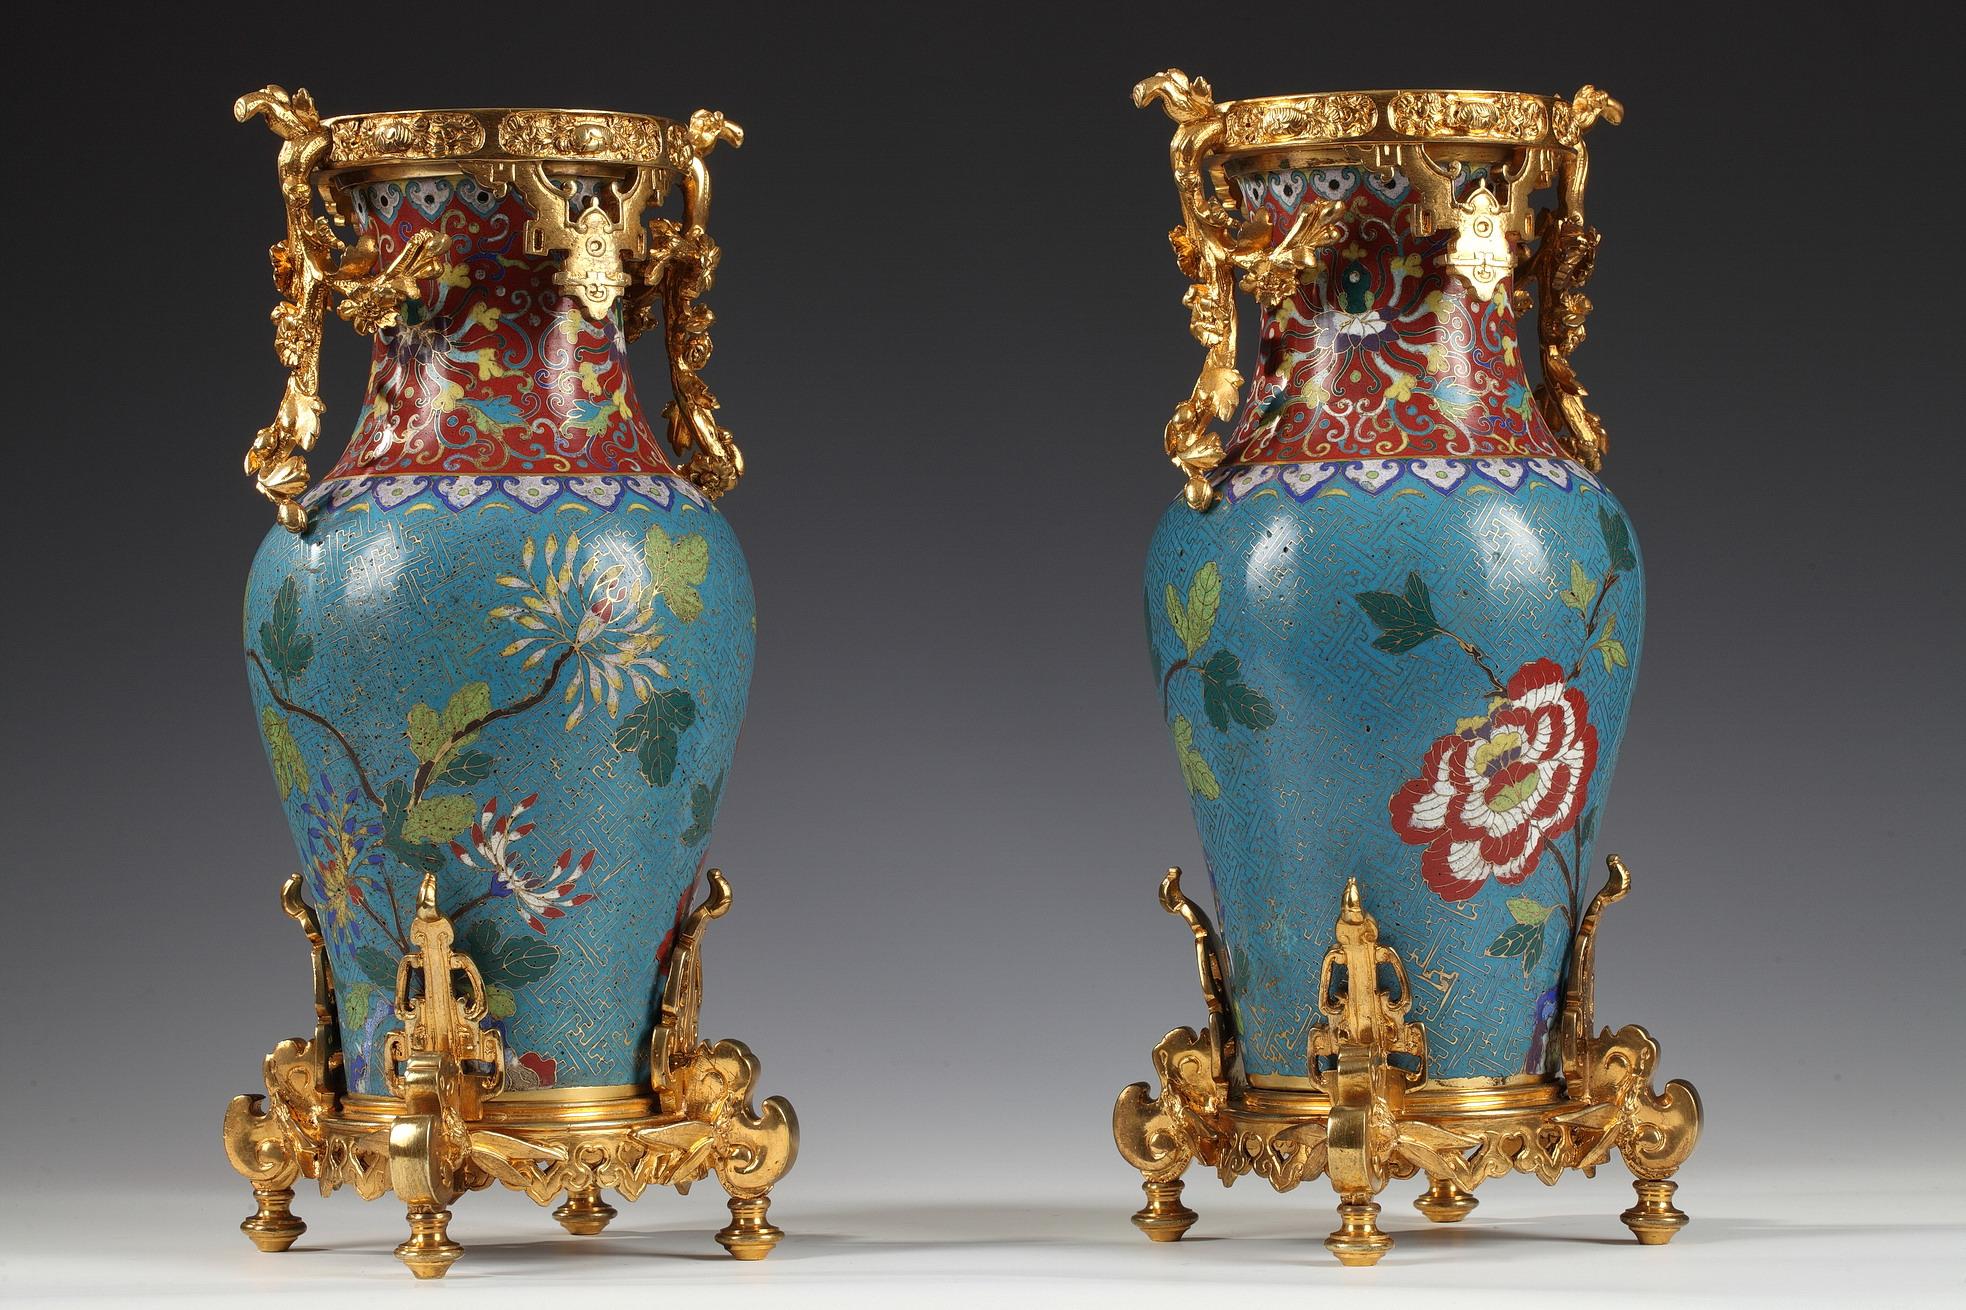 Elegant pair of Chinese cloisonné enamel vases in a gilt bronze mount attributed to the Escalier de Cristal. The vase is decorated with polychrome flowers and geometric gilded ornaments on a blue ground, and the neck with volutes on a red ground.